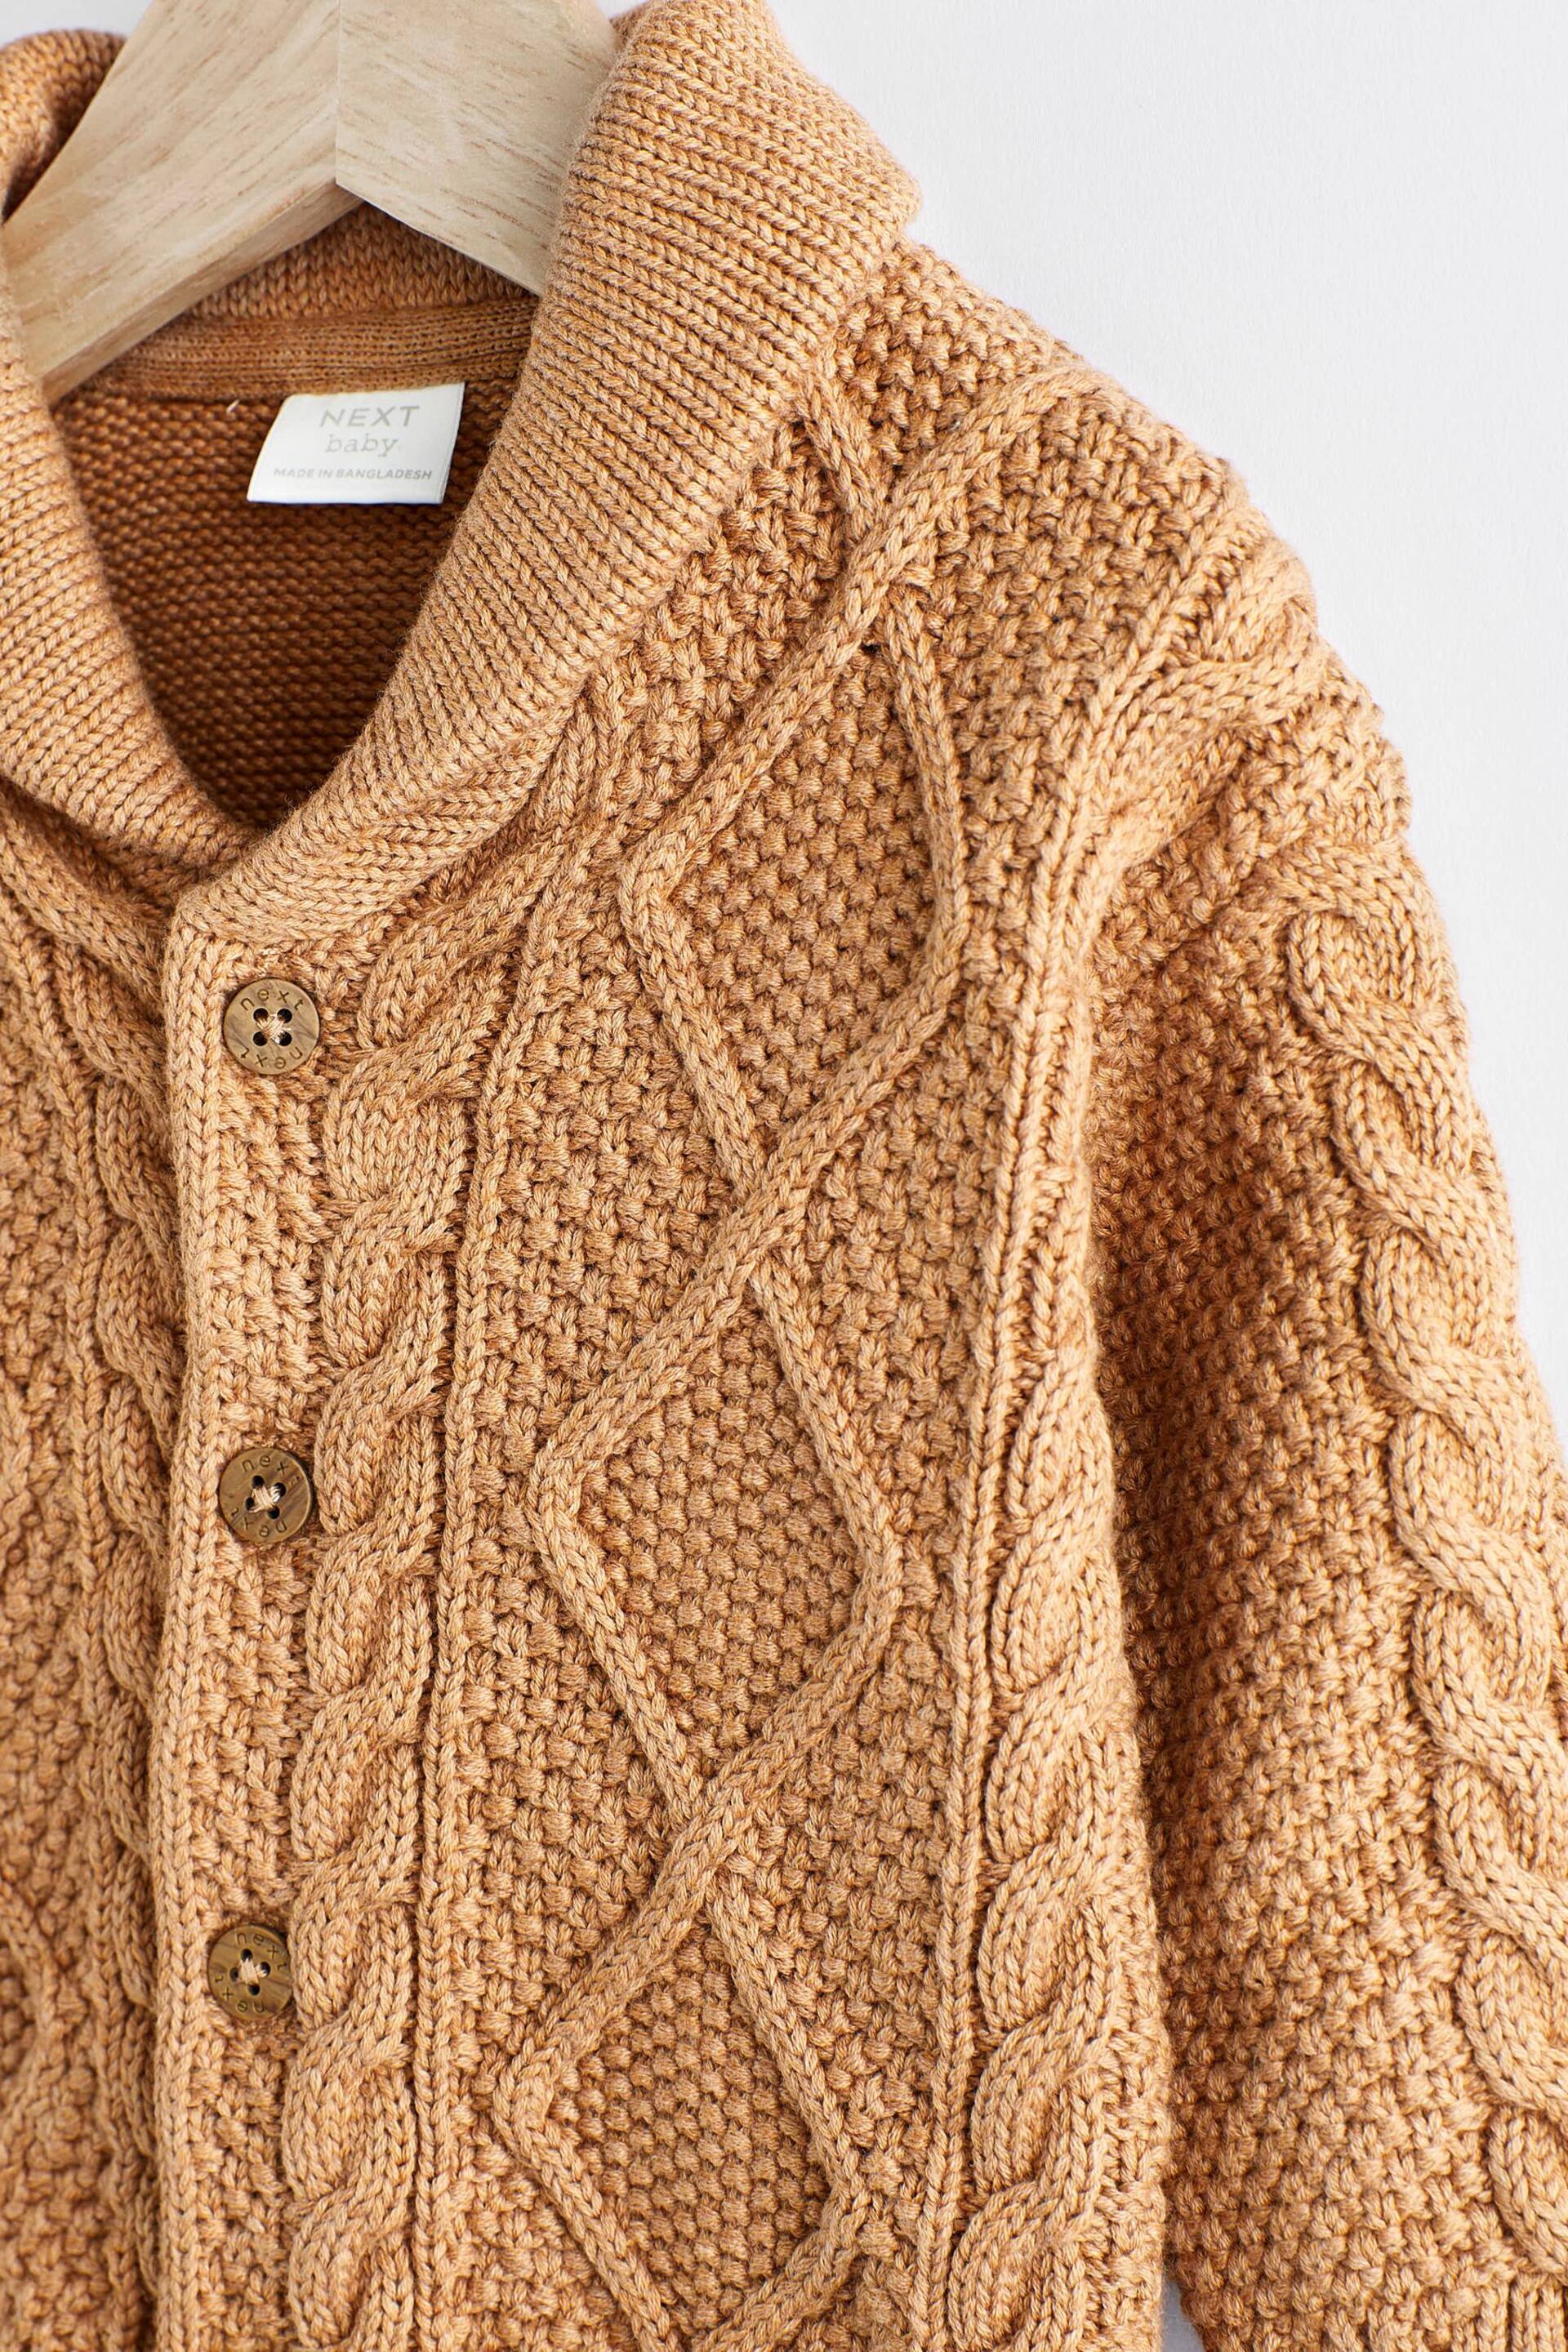 Tan Brown Cable Knitted Baby Cardigan (0mths-2yrs) - Image 3 of 7